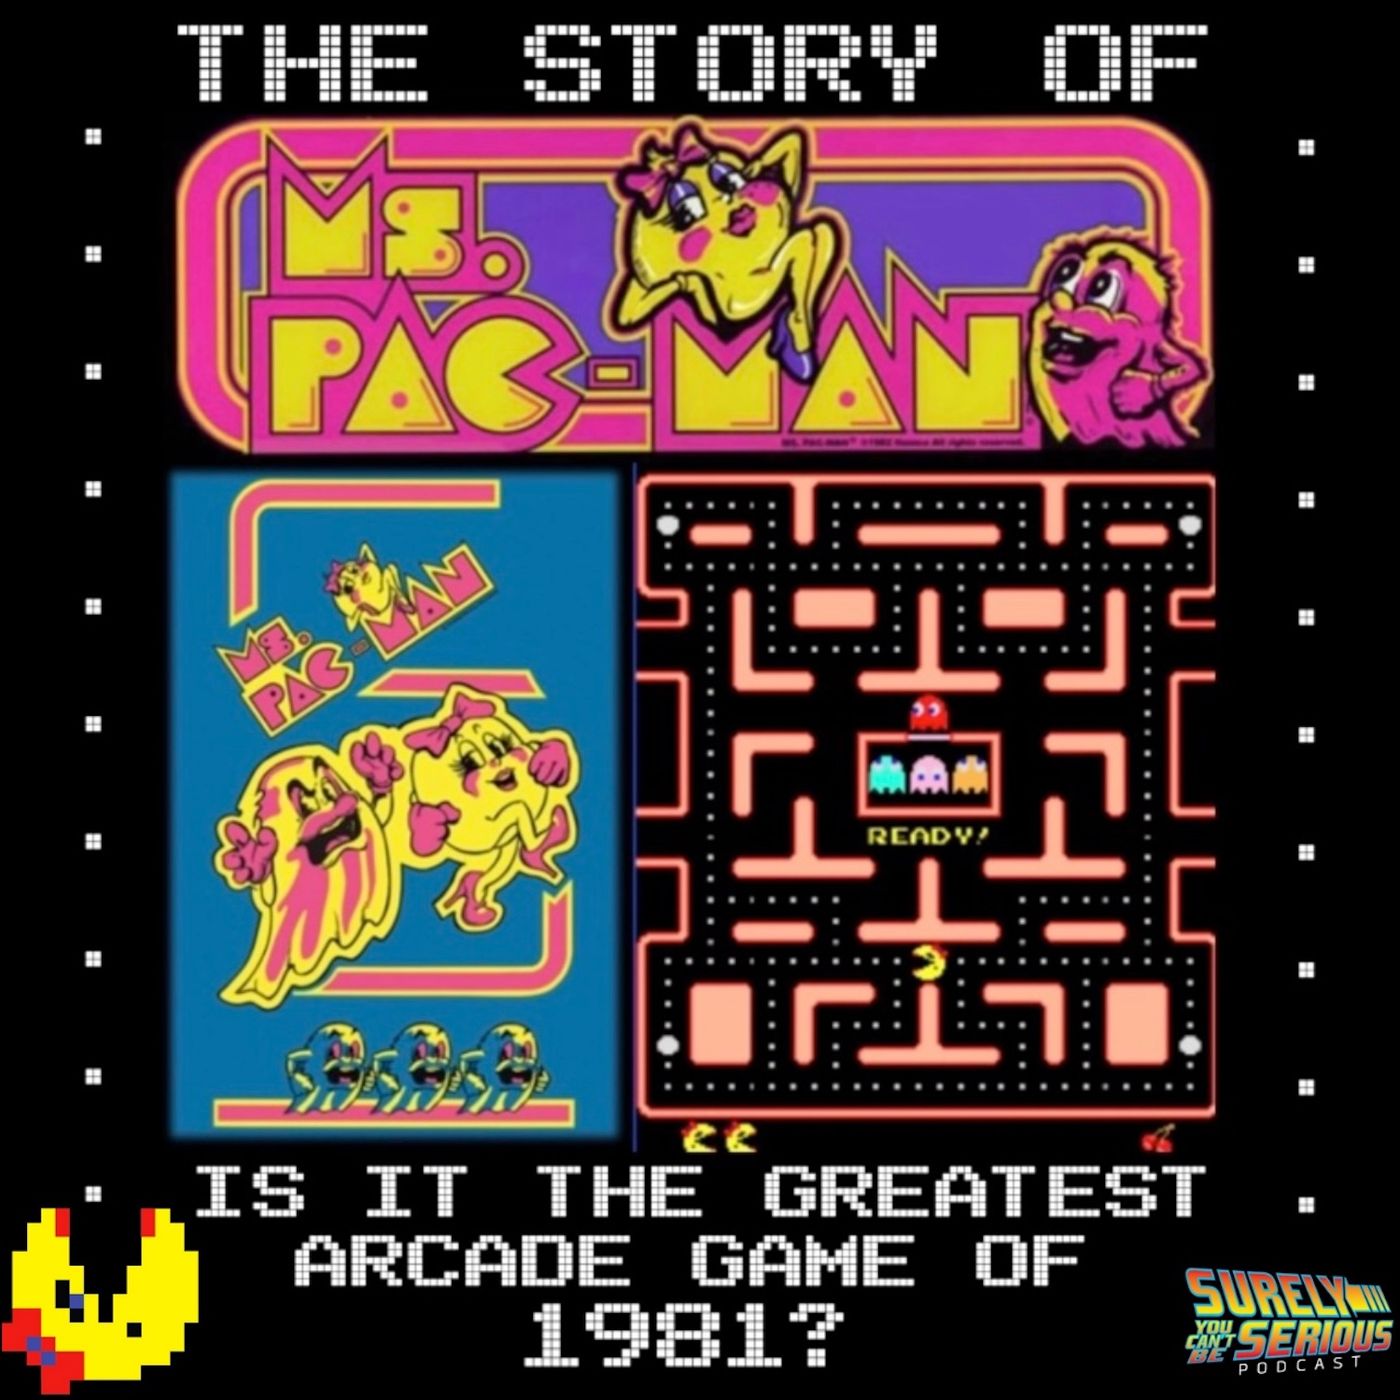 Video Games of 1981 - Level 4: Ms Pac Man Image